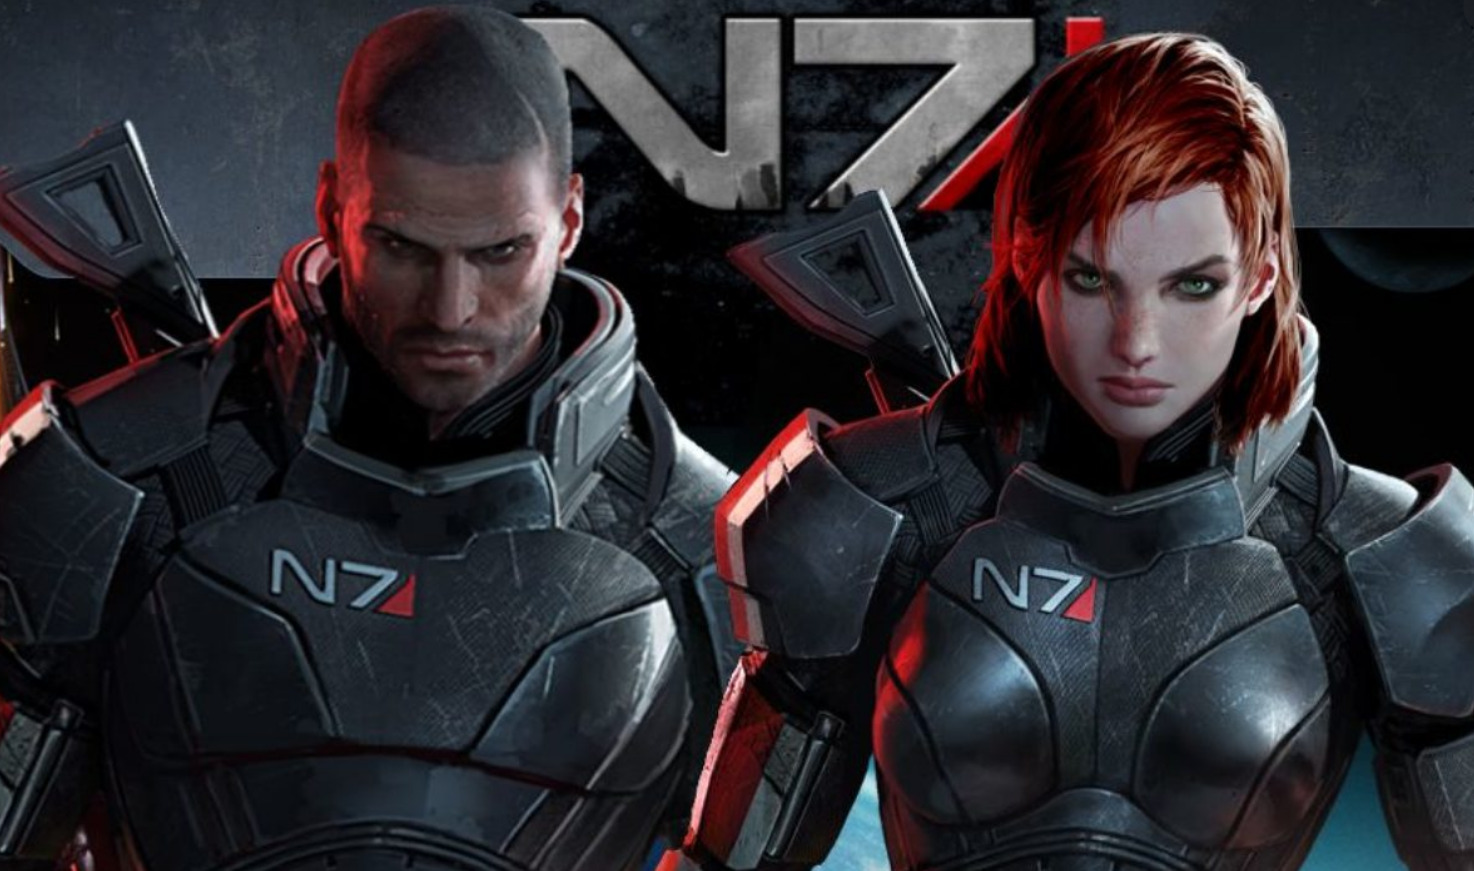 Mass Effect Voice Actors Are Reuniting On N7 Day. Will We Finally See An Announcement For The The Trilogy’s Re-Release?